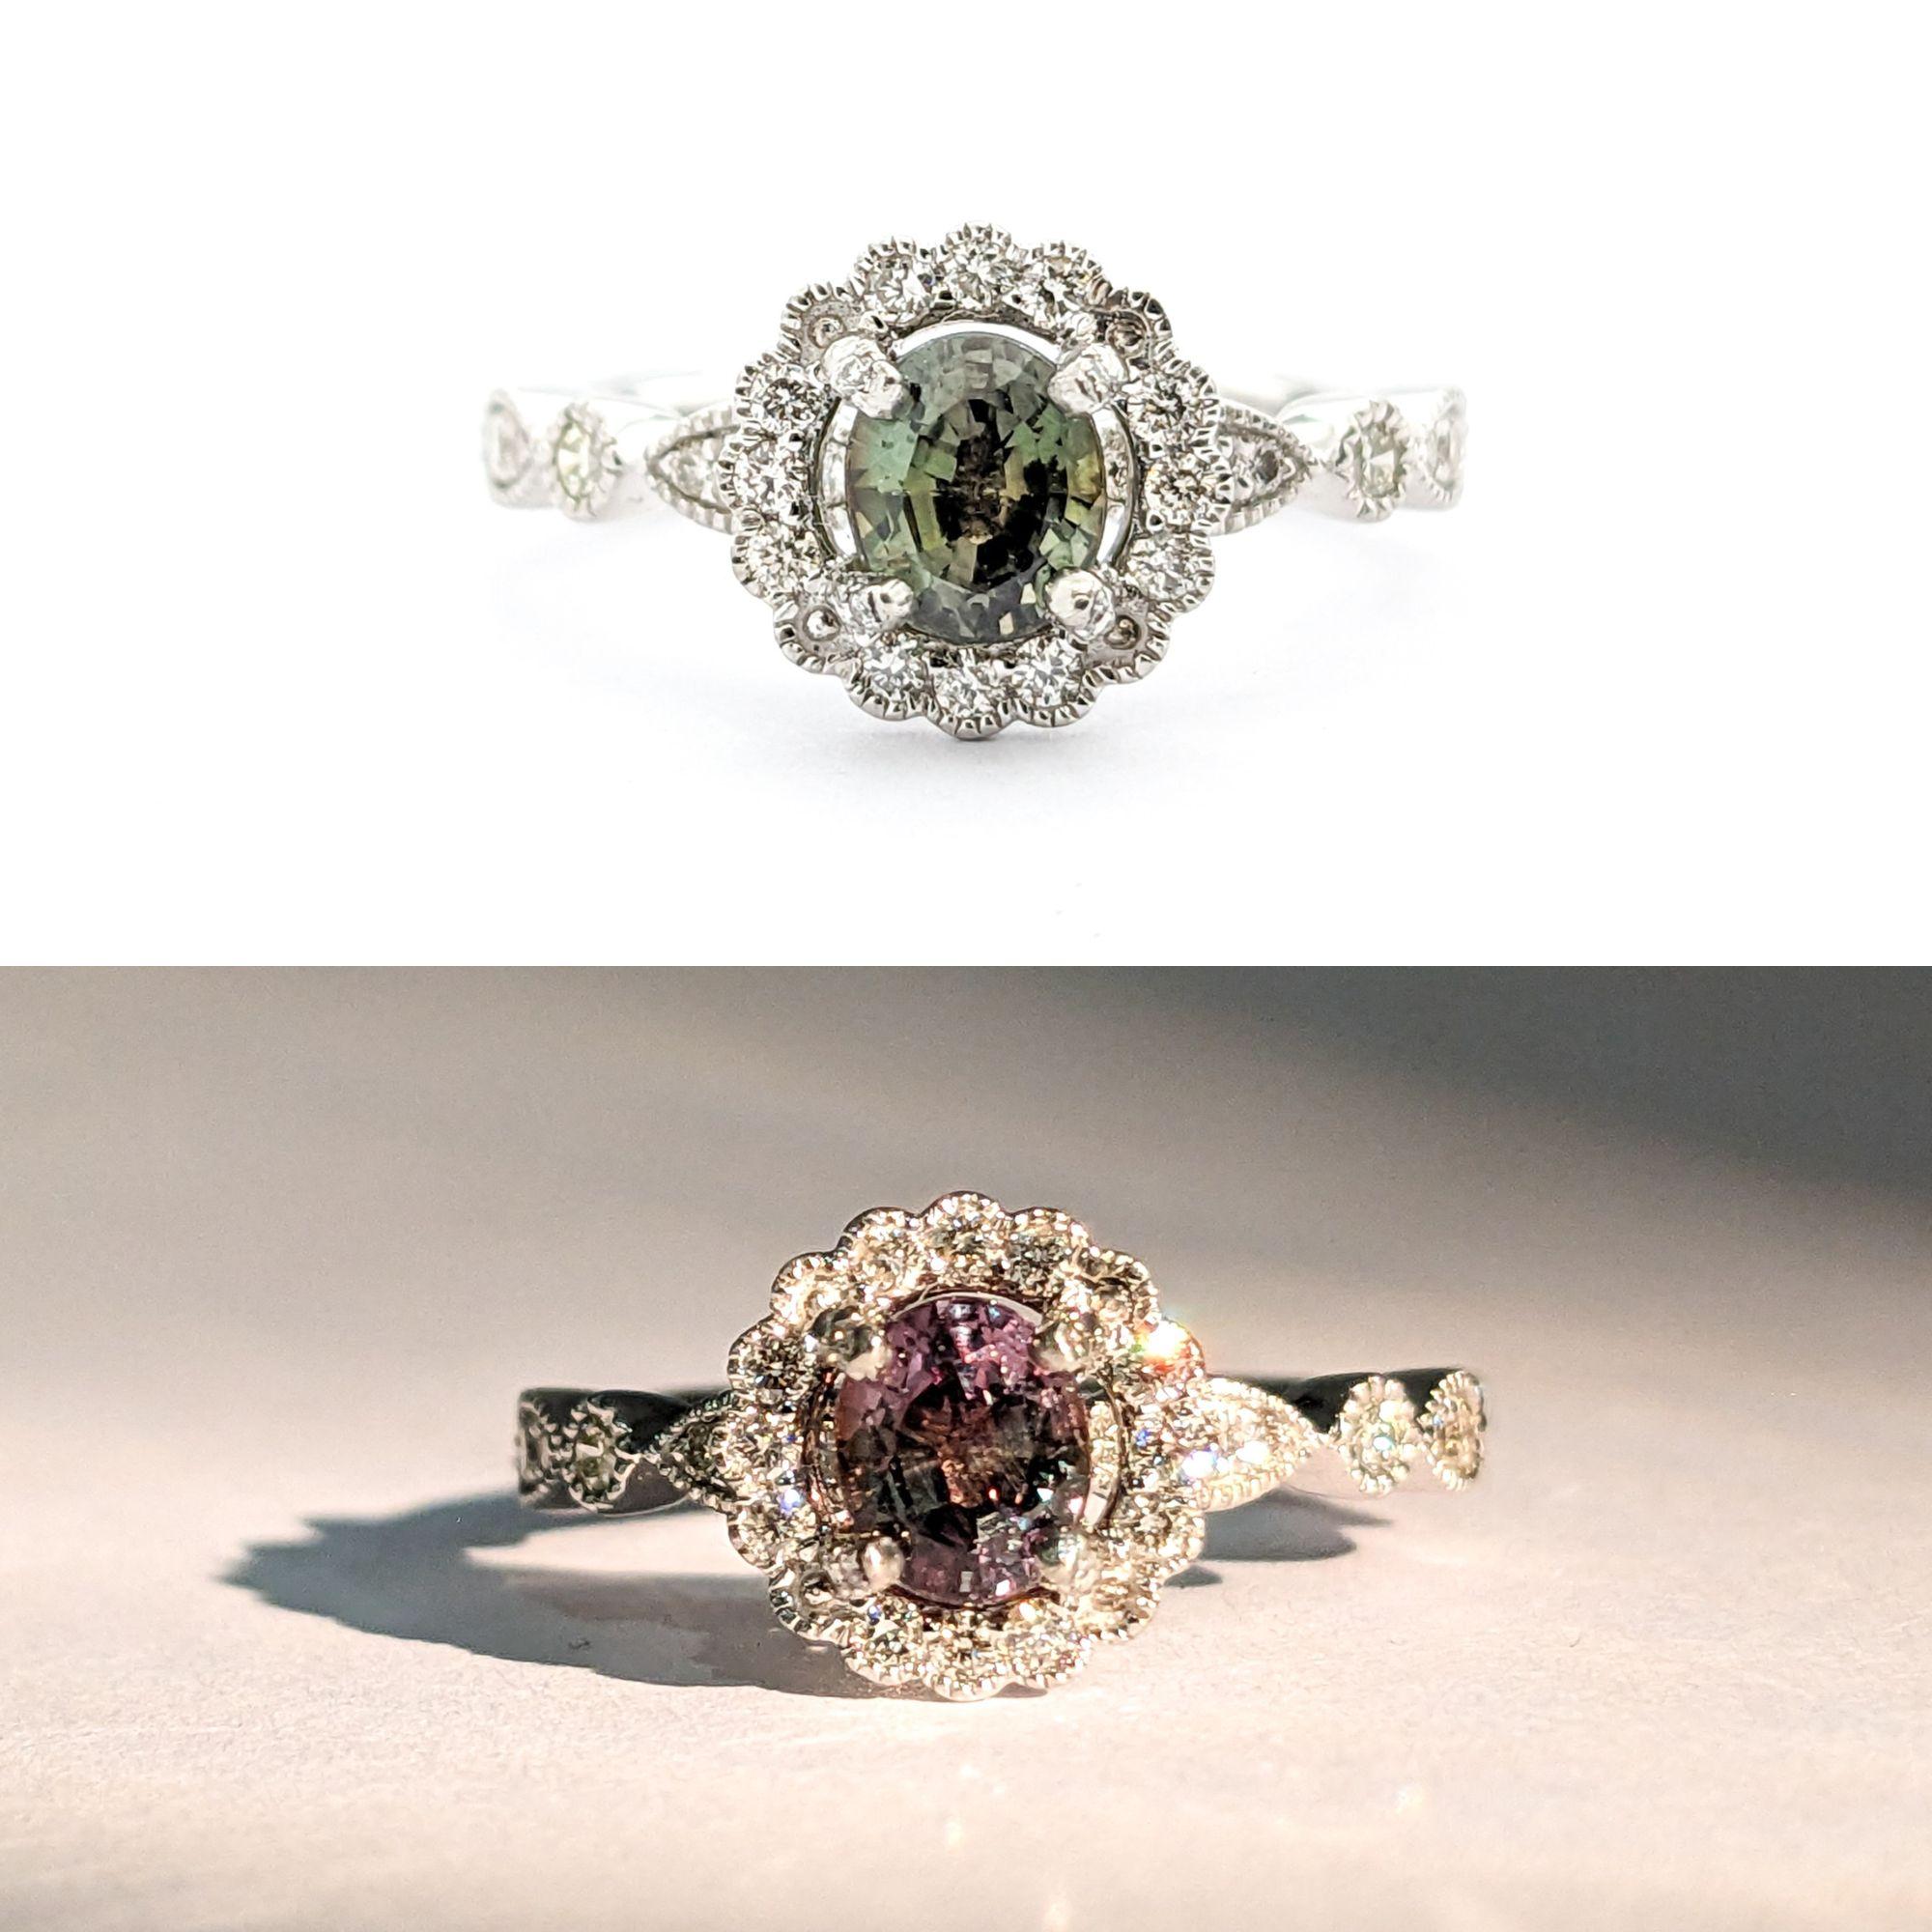 Romantic Natural Alexandrite & Diamond Halo Ring in Platinum

Discover the epitome of luxury with our captivating platinum ring, featuring a mesmerizing .97ct oval natural Alexandrite center stone. This alexandrite has a beautiful color change from